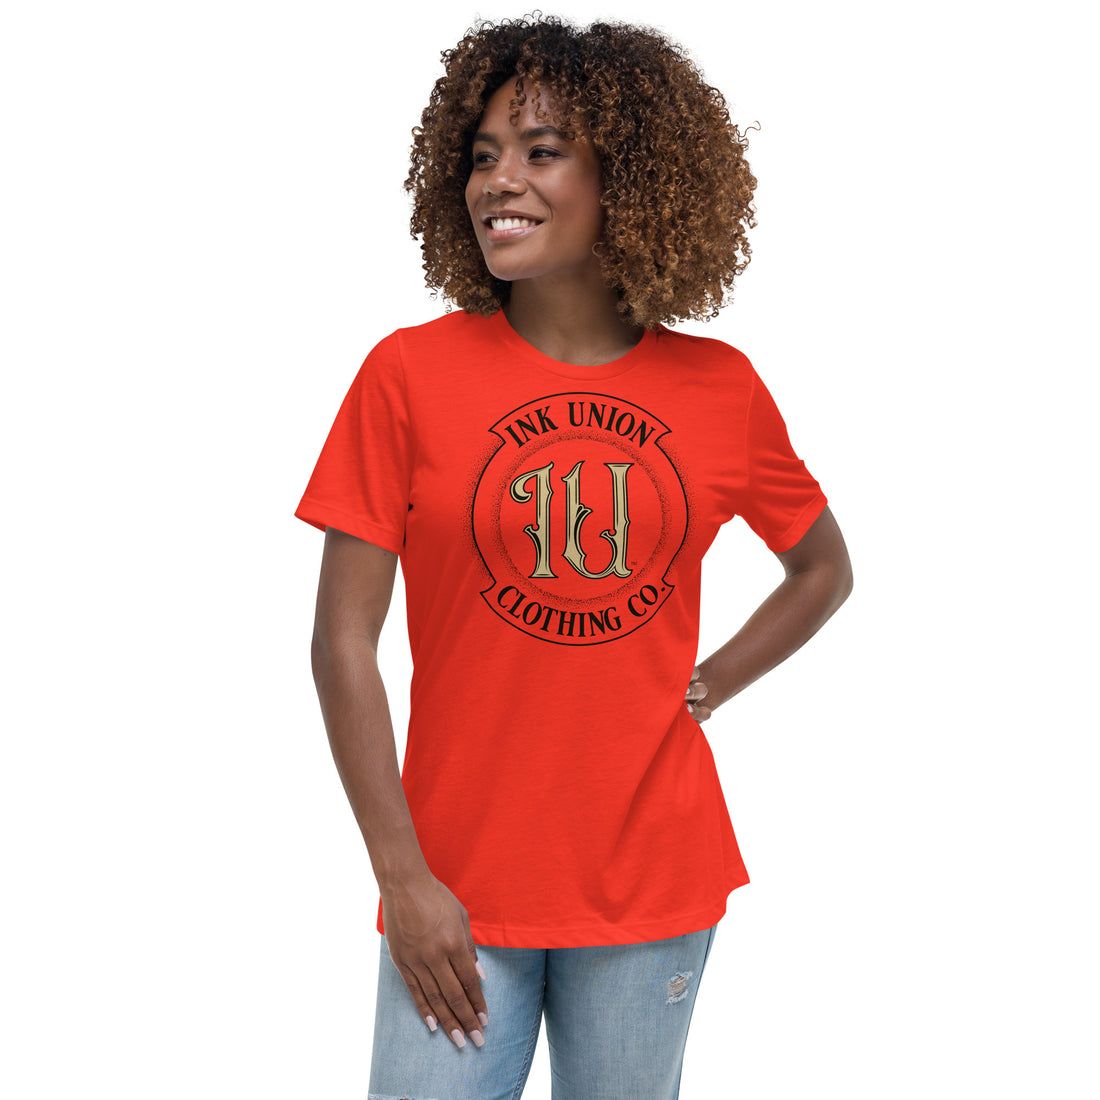 An attractive woman wearing a poppy red t-shirt with a large gold and black Ink Union badge Logo centered on the chest.